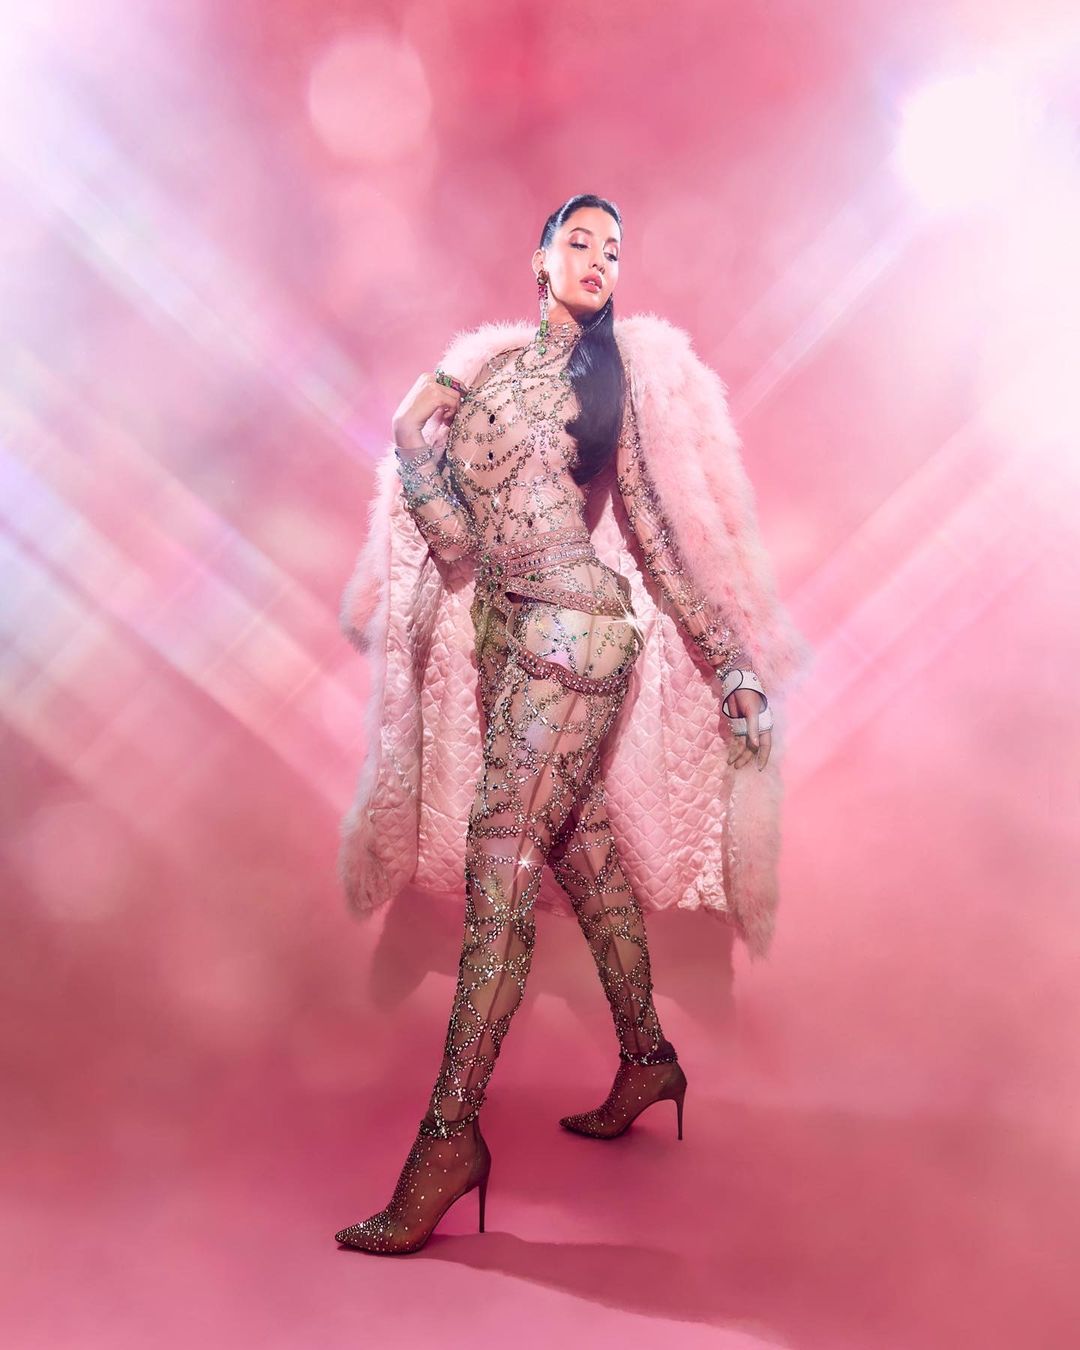 Nora Fatehi looks enchanting in baby pink blingy bodysuit with matching fur  coat, and statement accessories